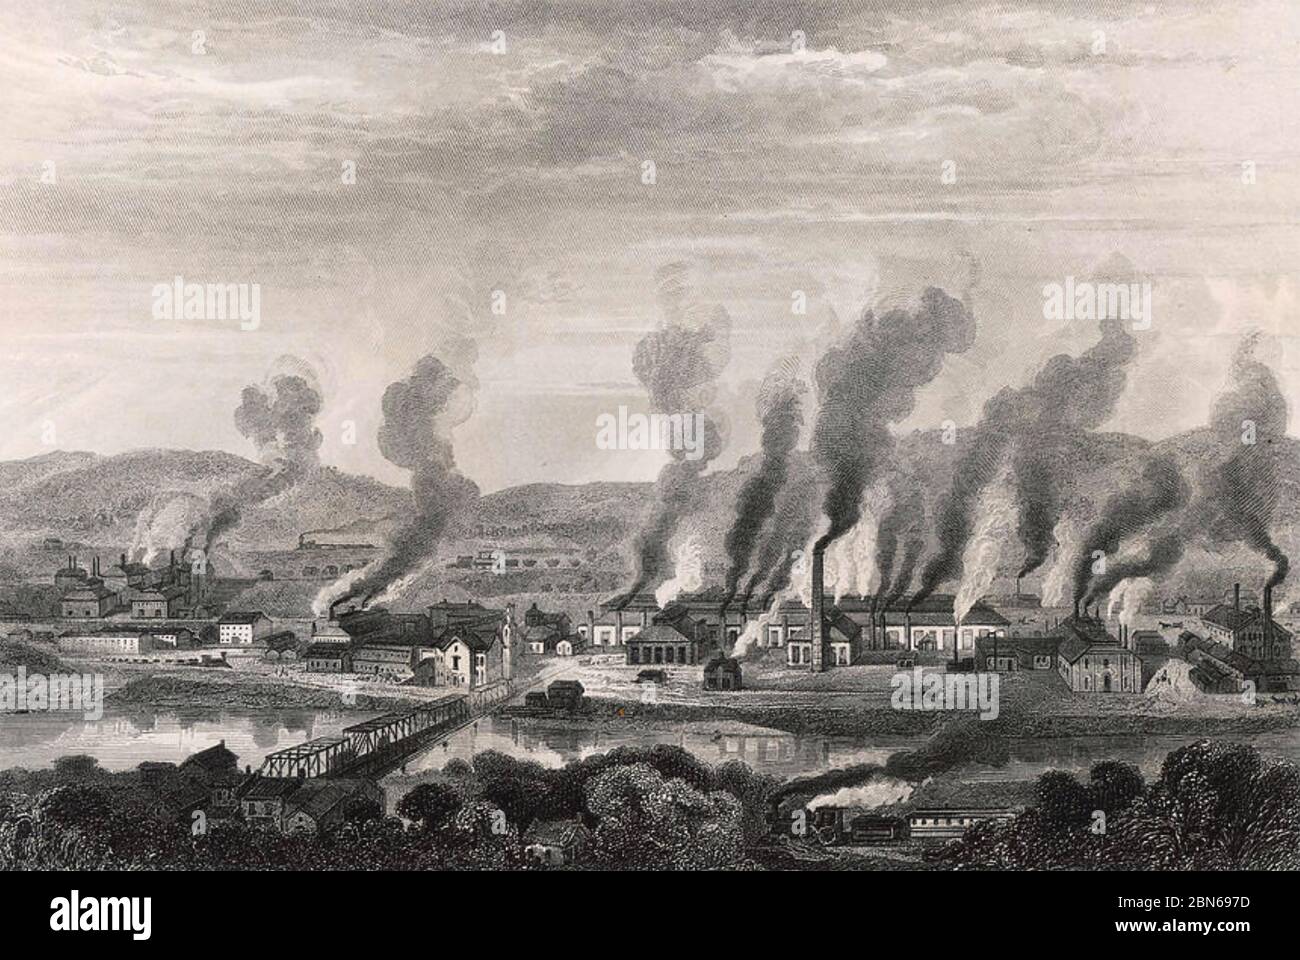 BARROW-IN-FURNESS, England. Th Cumbria Iron and Steel Works in a 19th century engraving Stock Photo